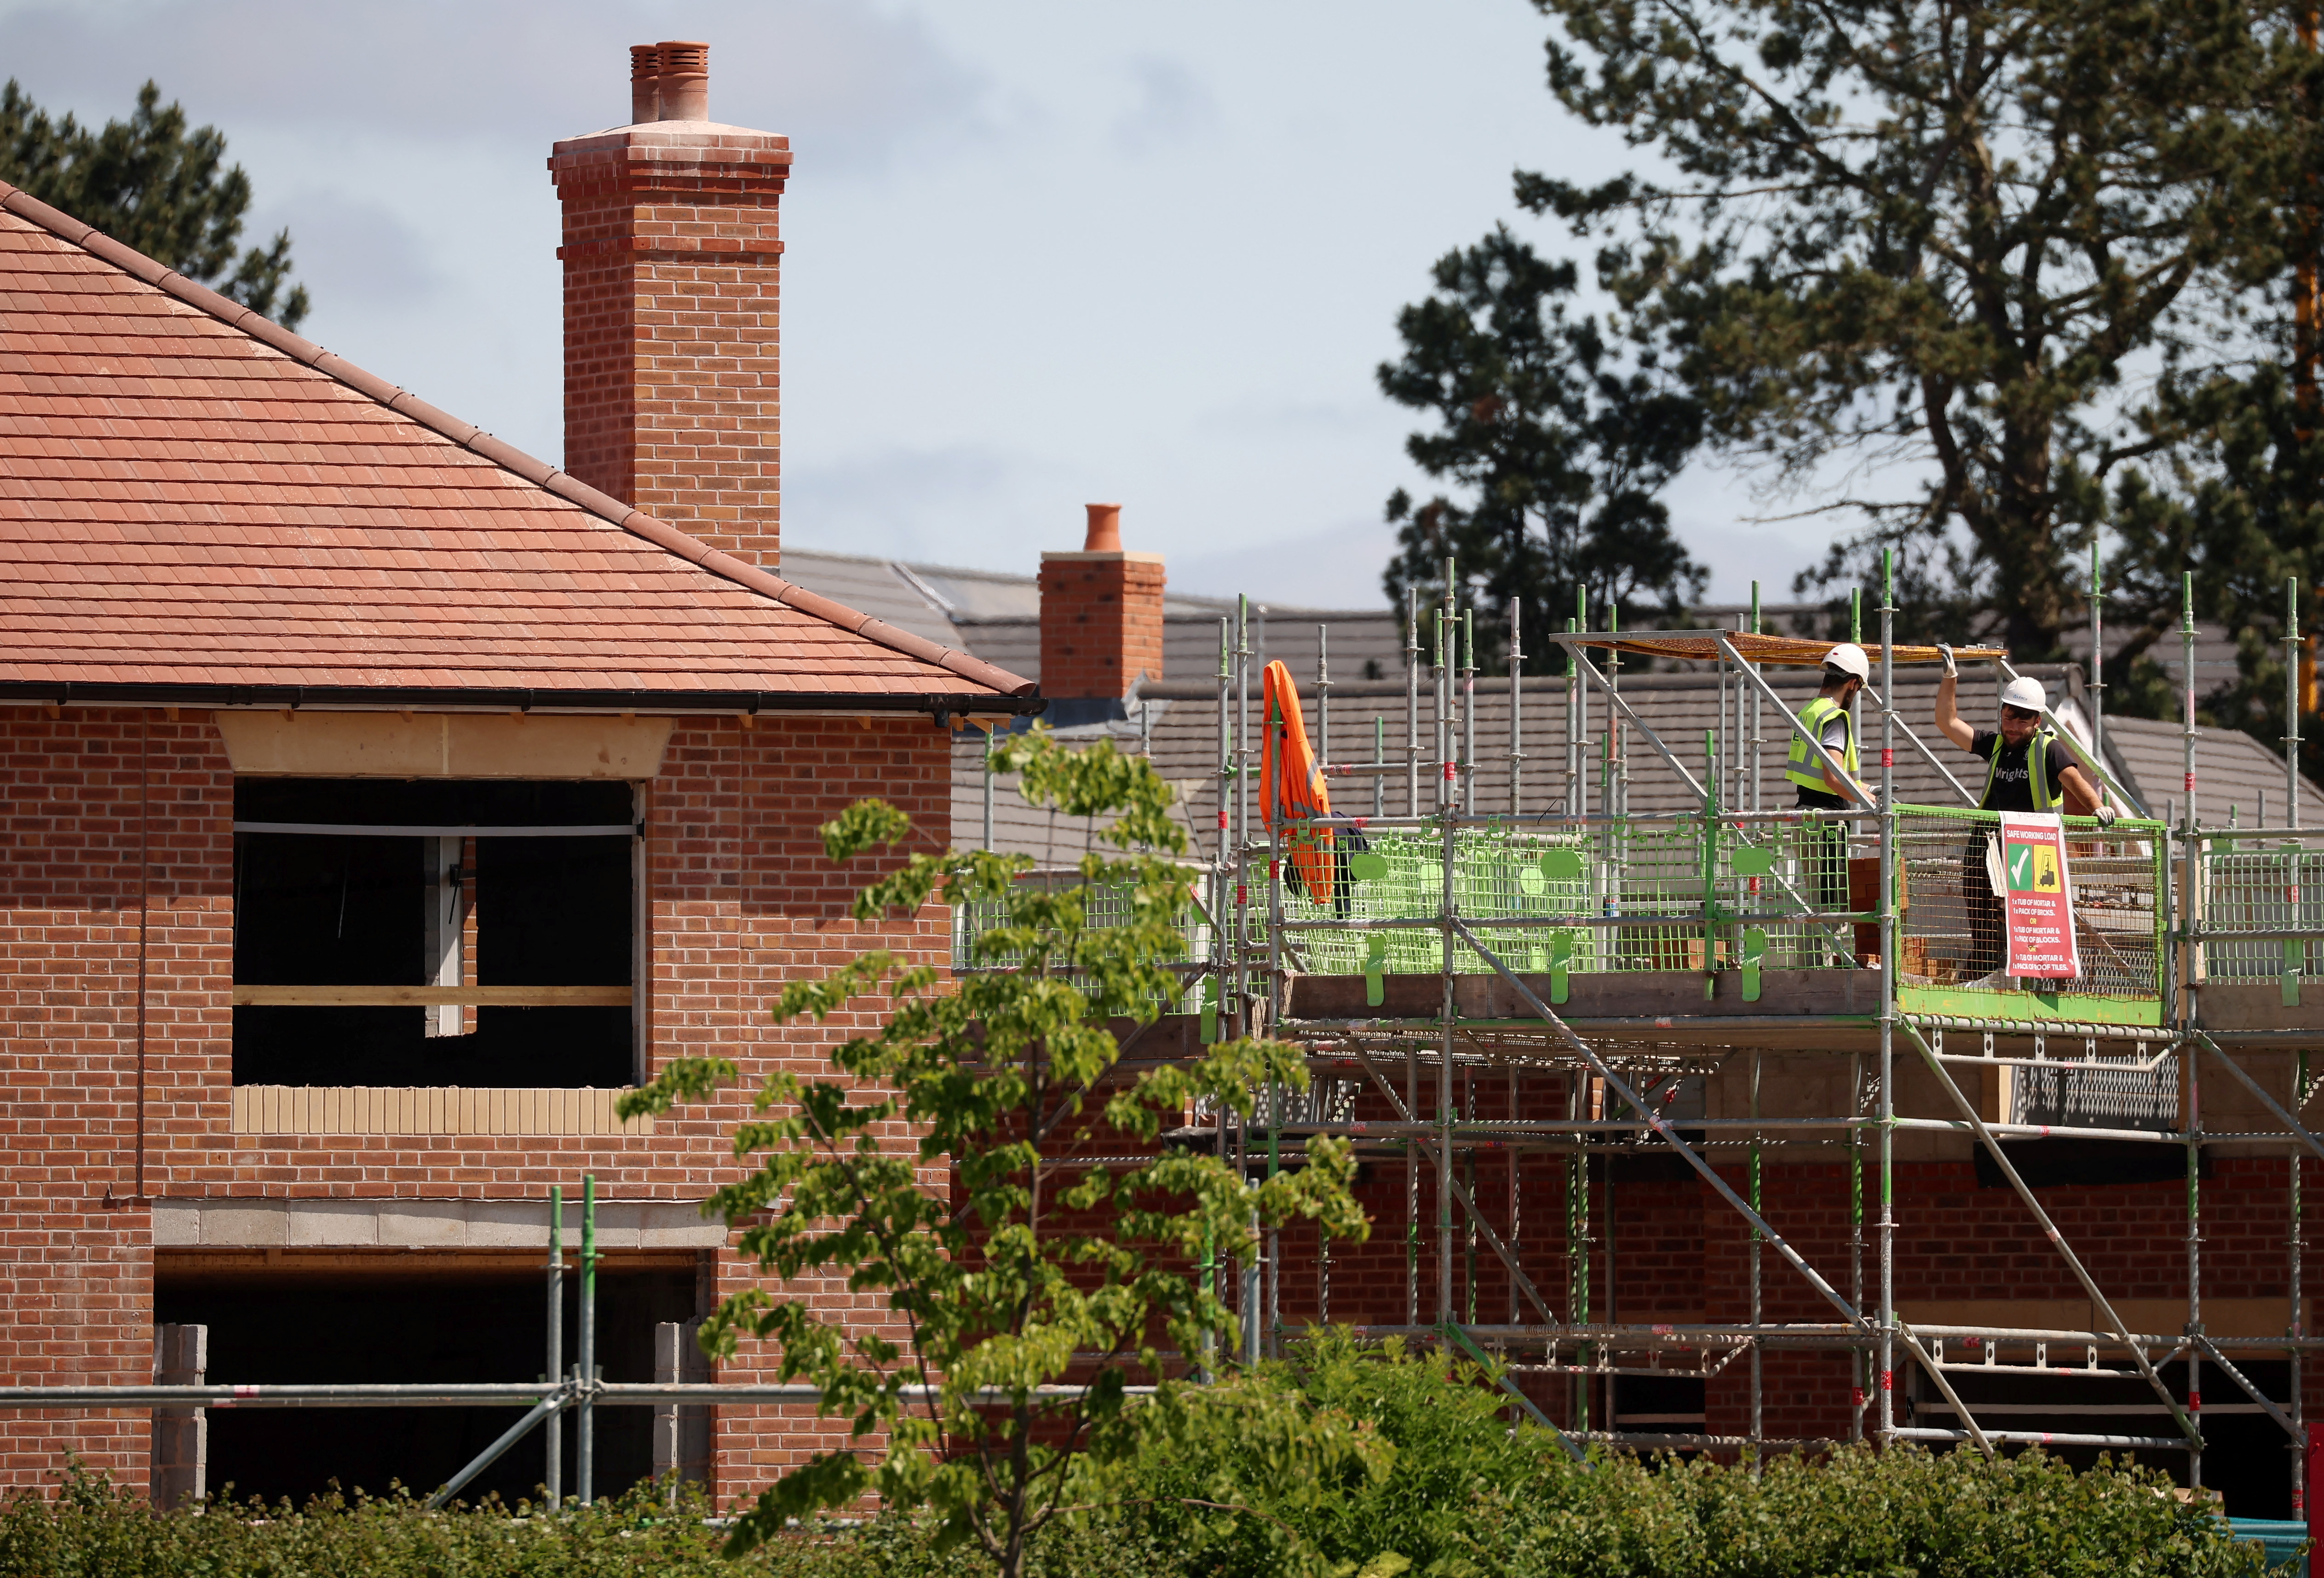 A construction worker stands on a scaffold platform on a new housing development under construction in Knutsford, Britain